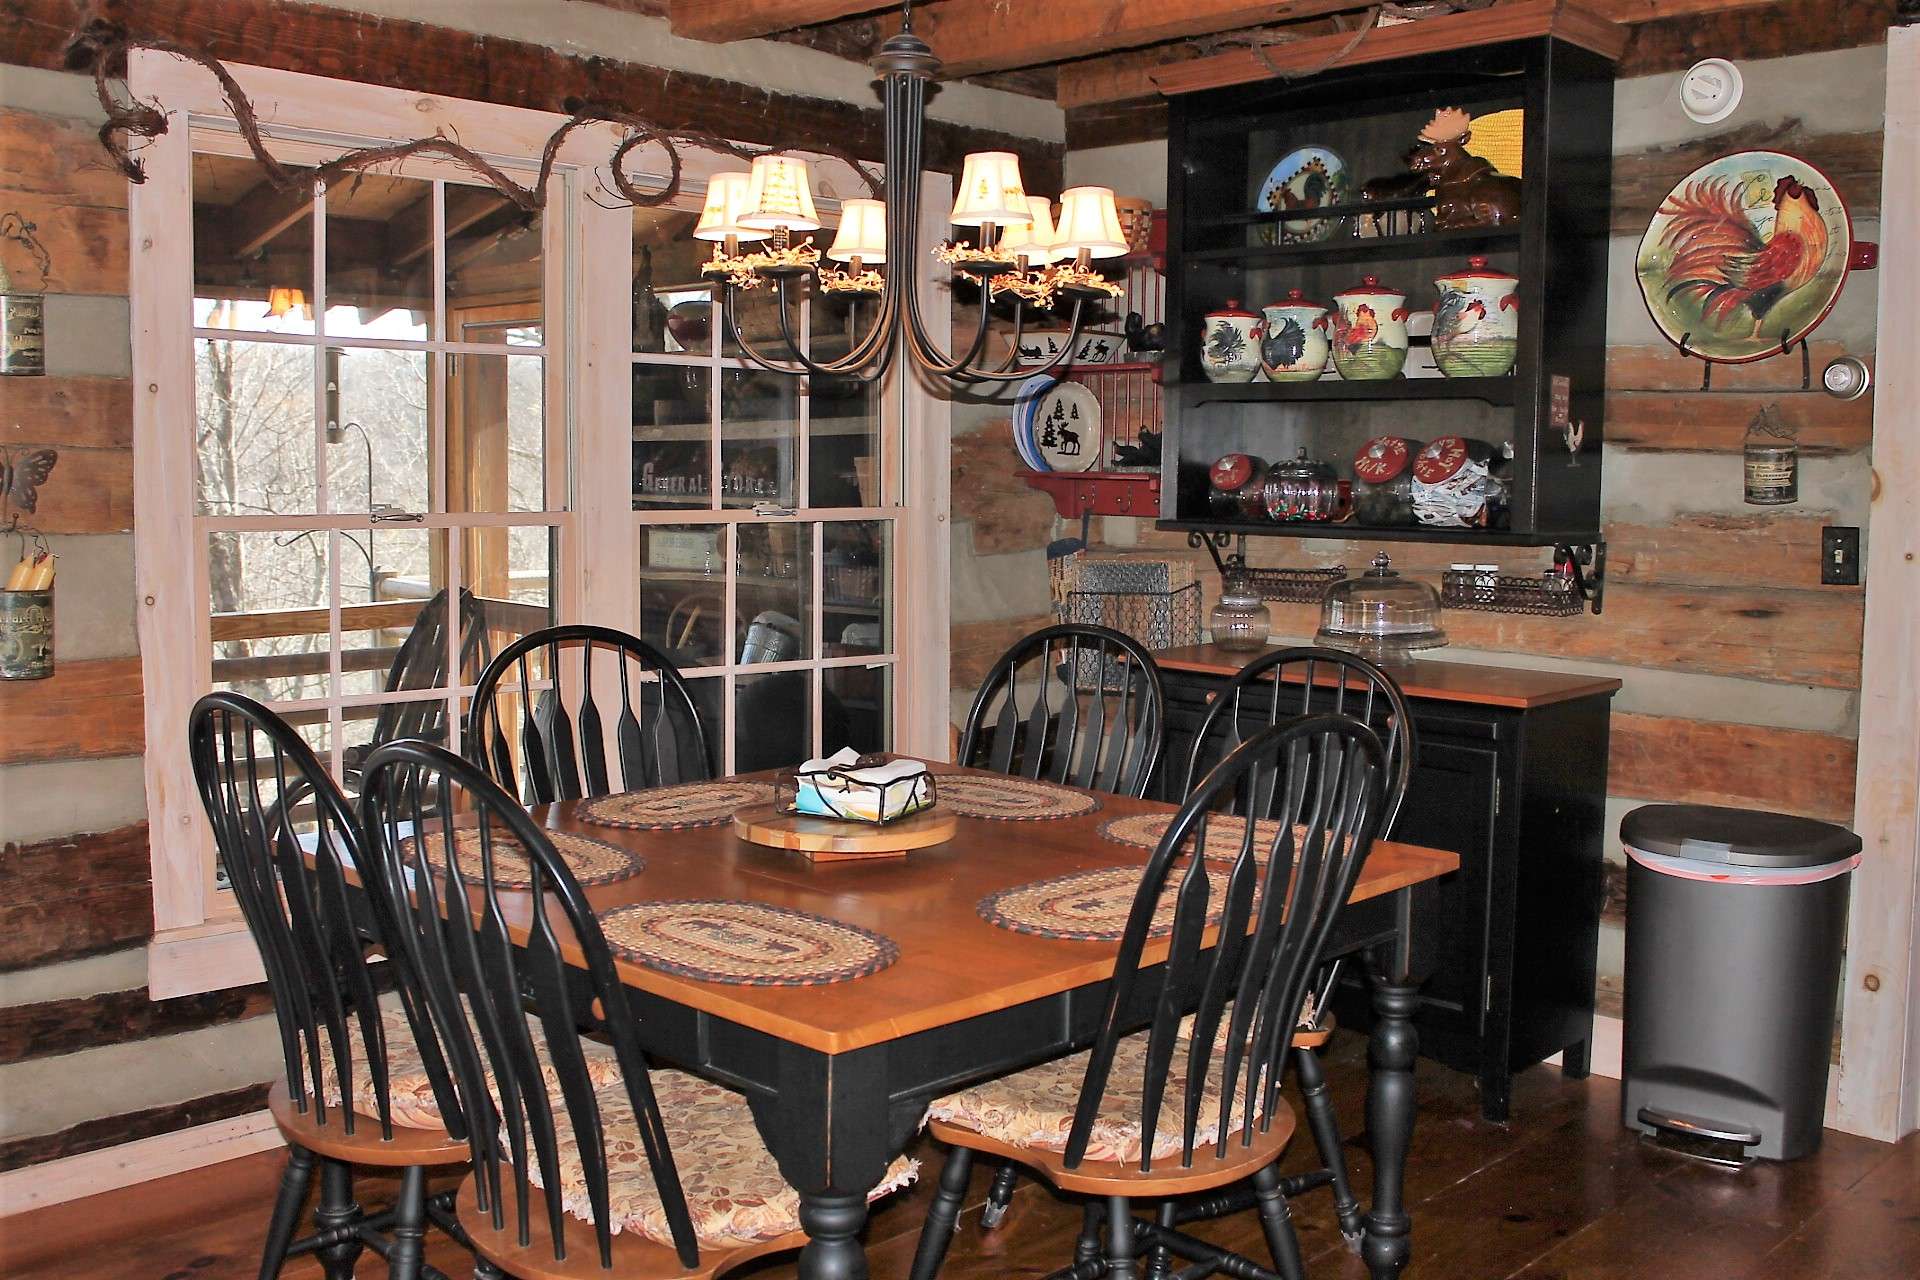 Dining area is spacious for larger family get togethers.